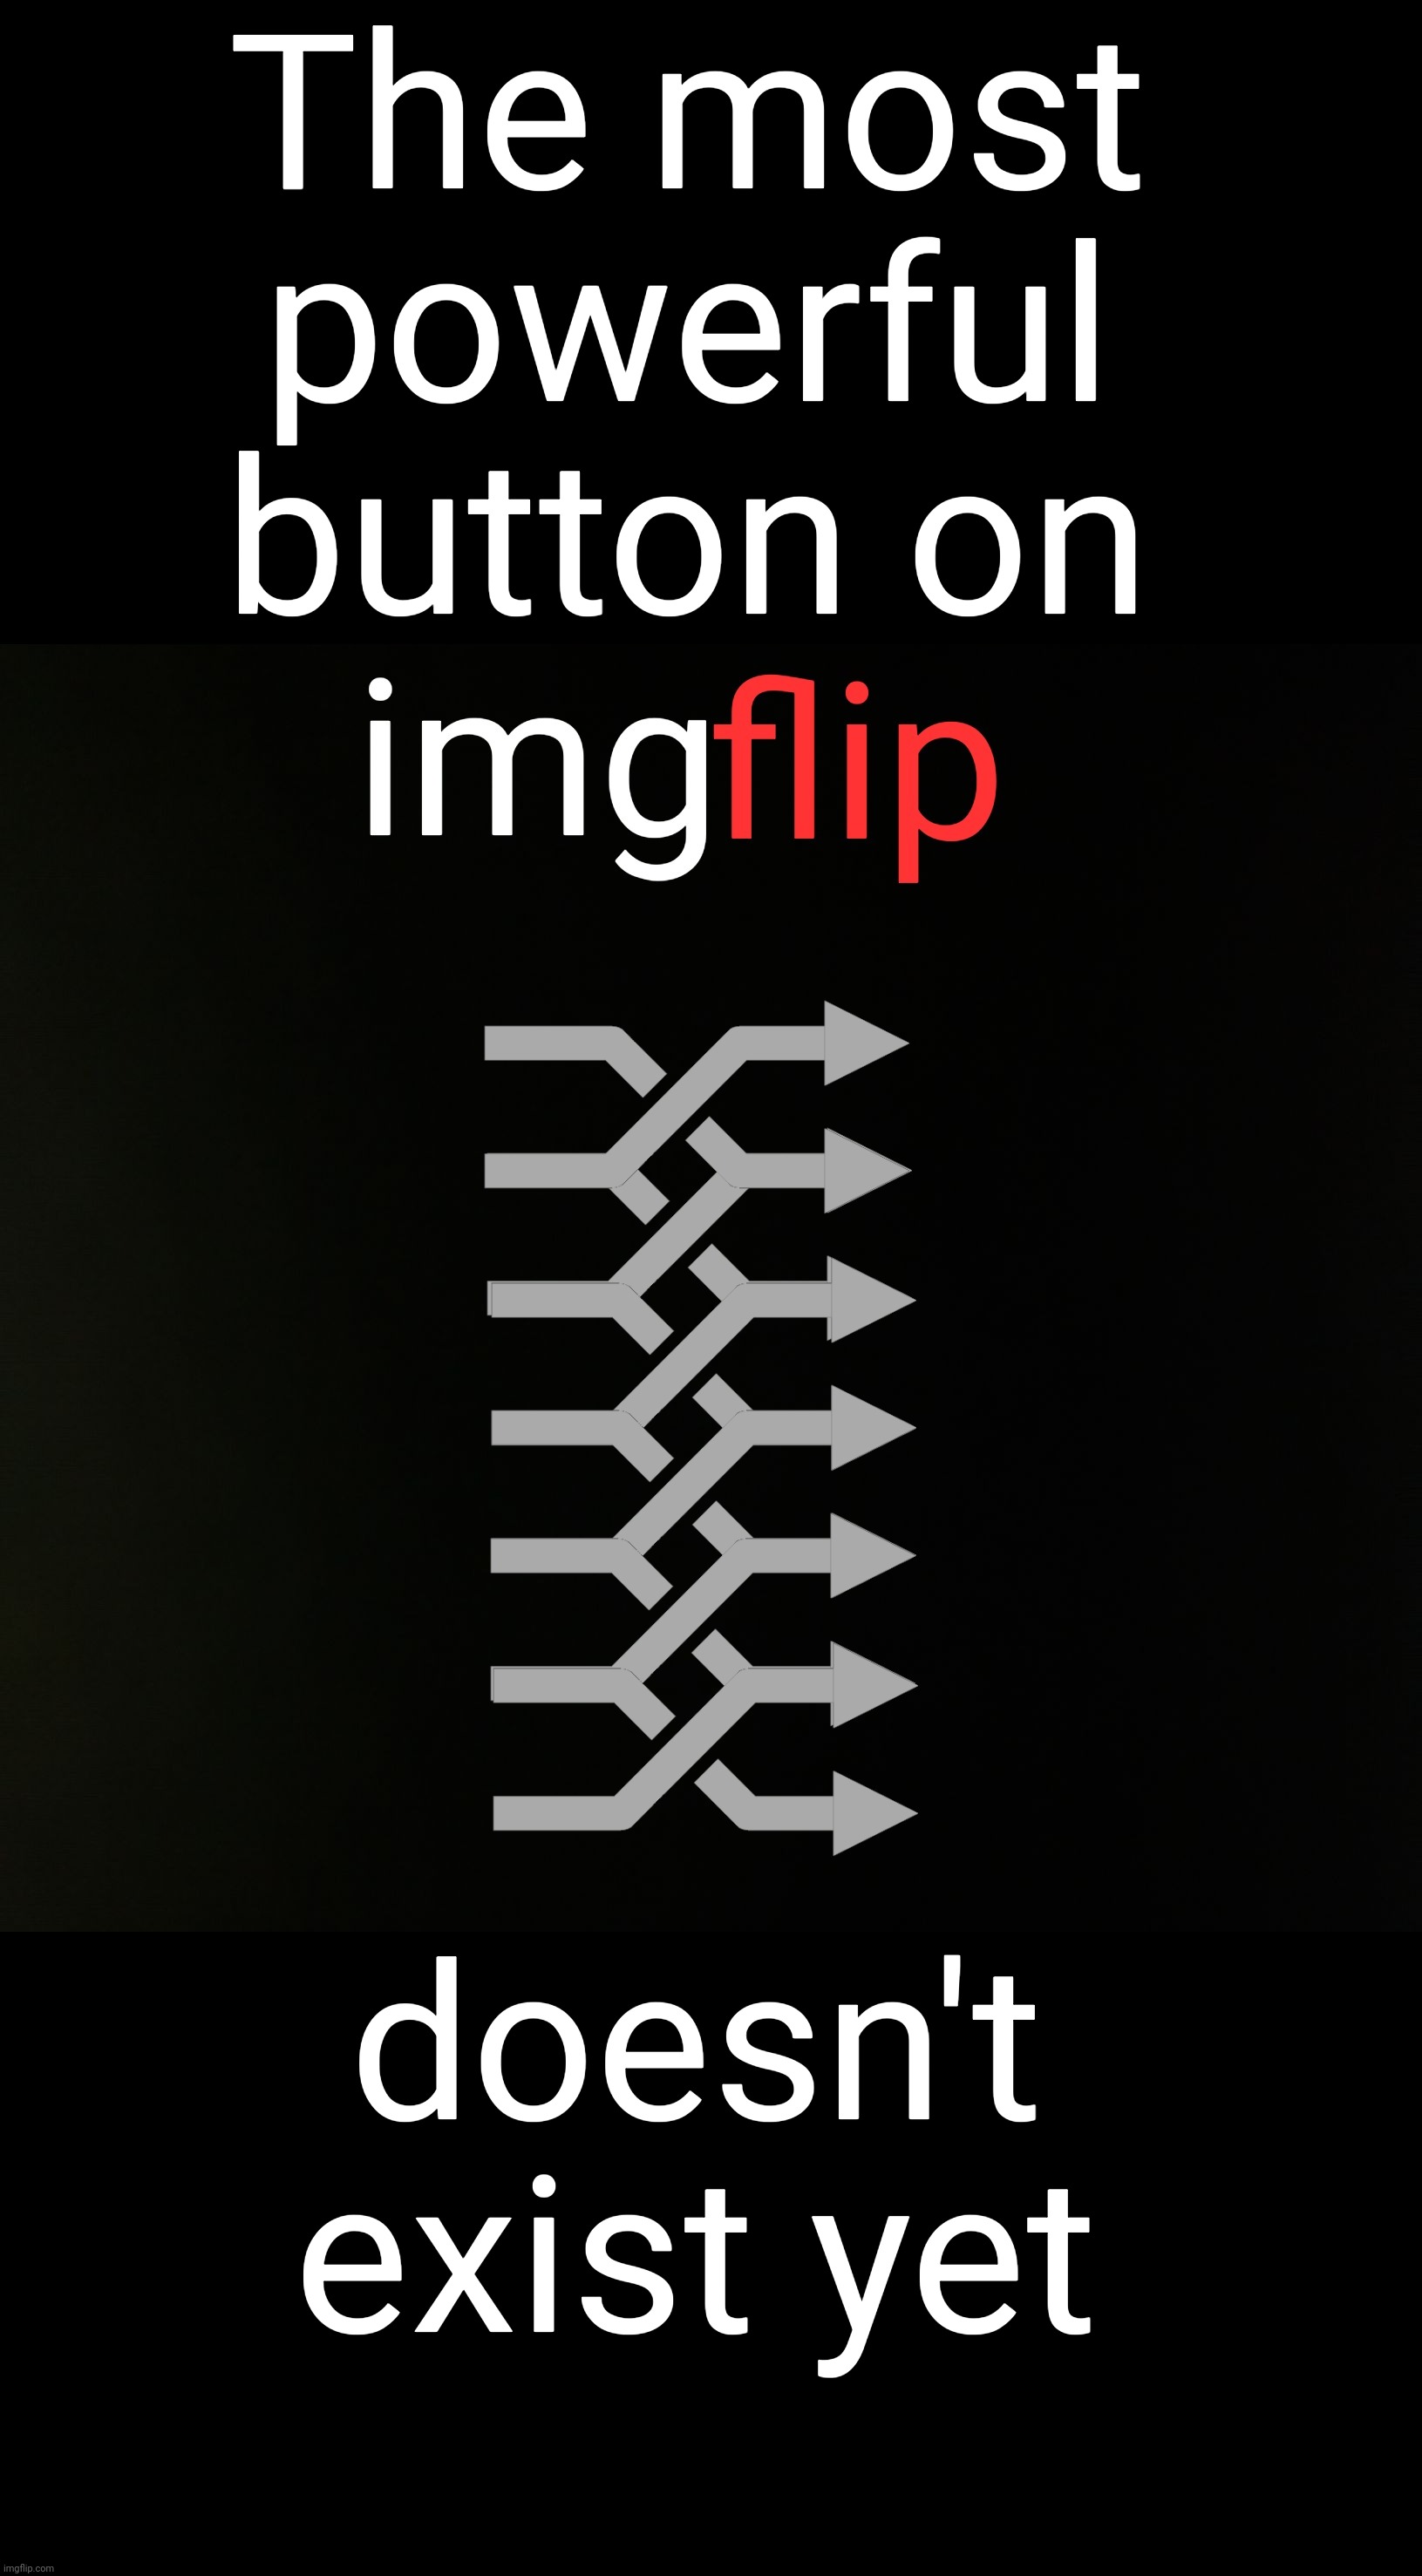 Bring back a flip button, give it some juice. | The most powerful
button on; doesn't exist yet | image tagged in imgflip,flip,flips,backflips,flip button,nostalgia | made w/ Imgflip meme maker